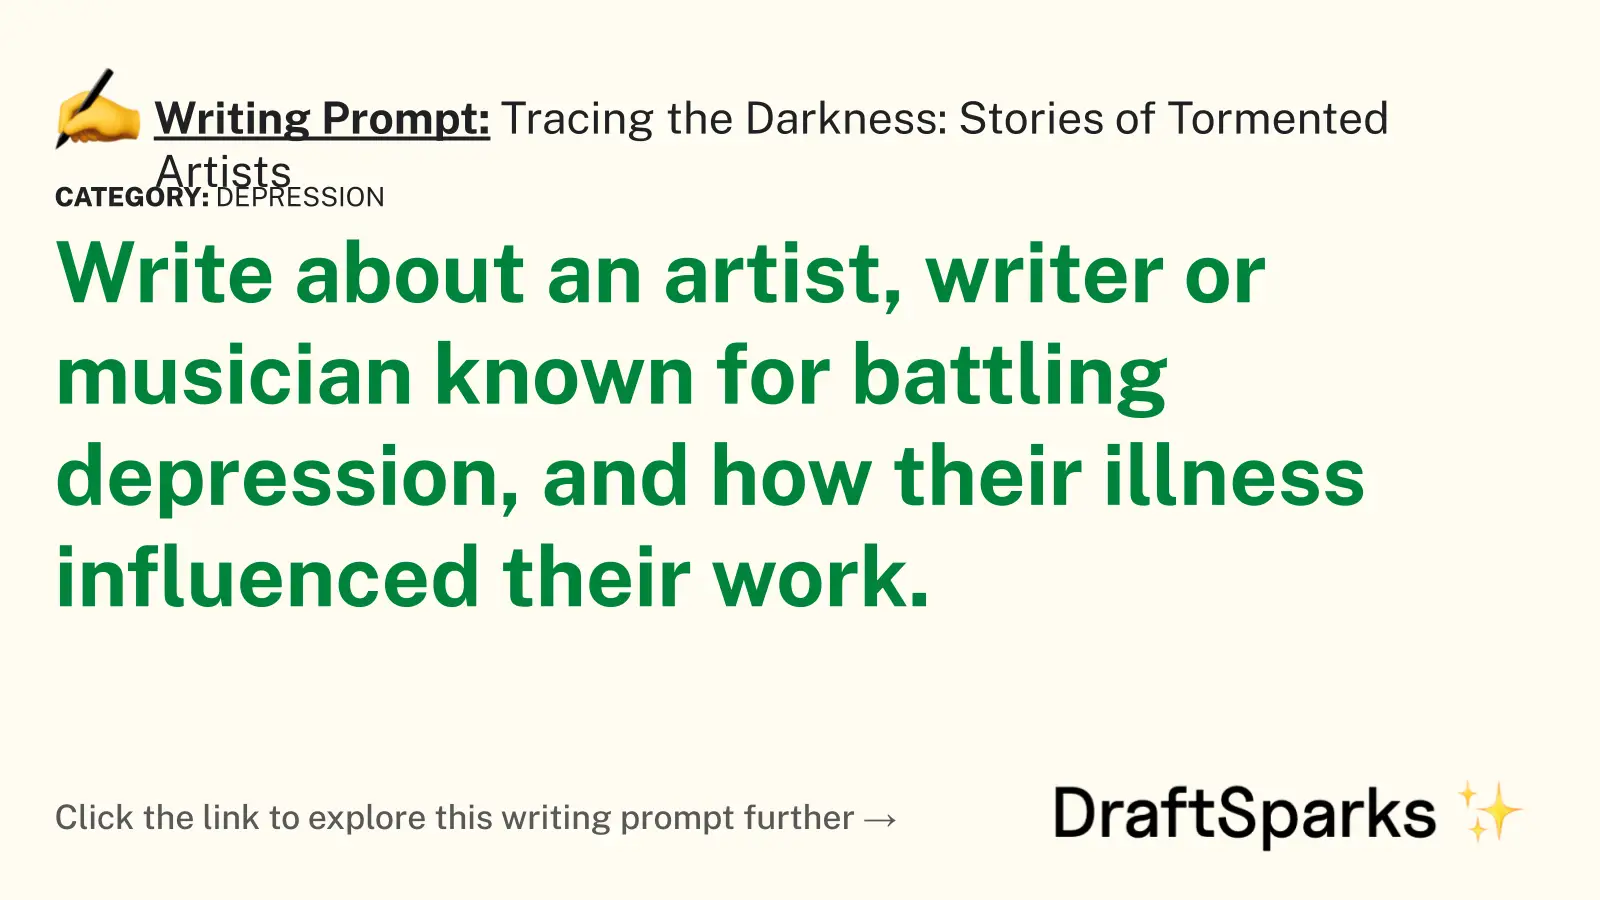 Tracing the Darkness: Stories of Tormented Artists